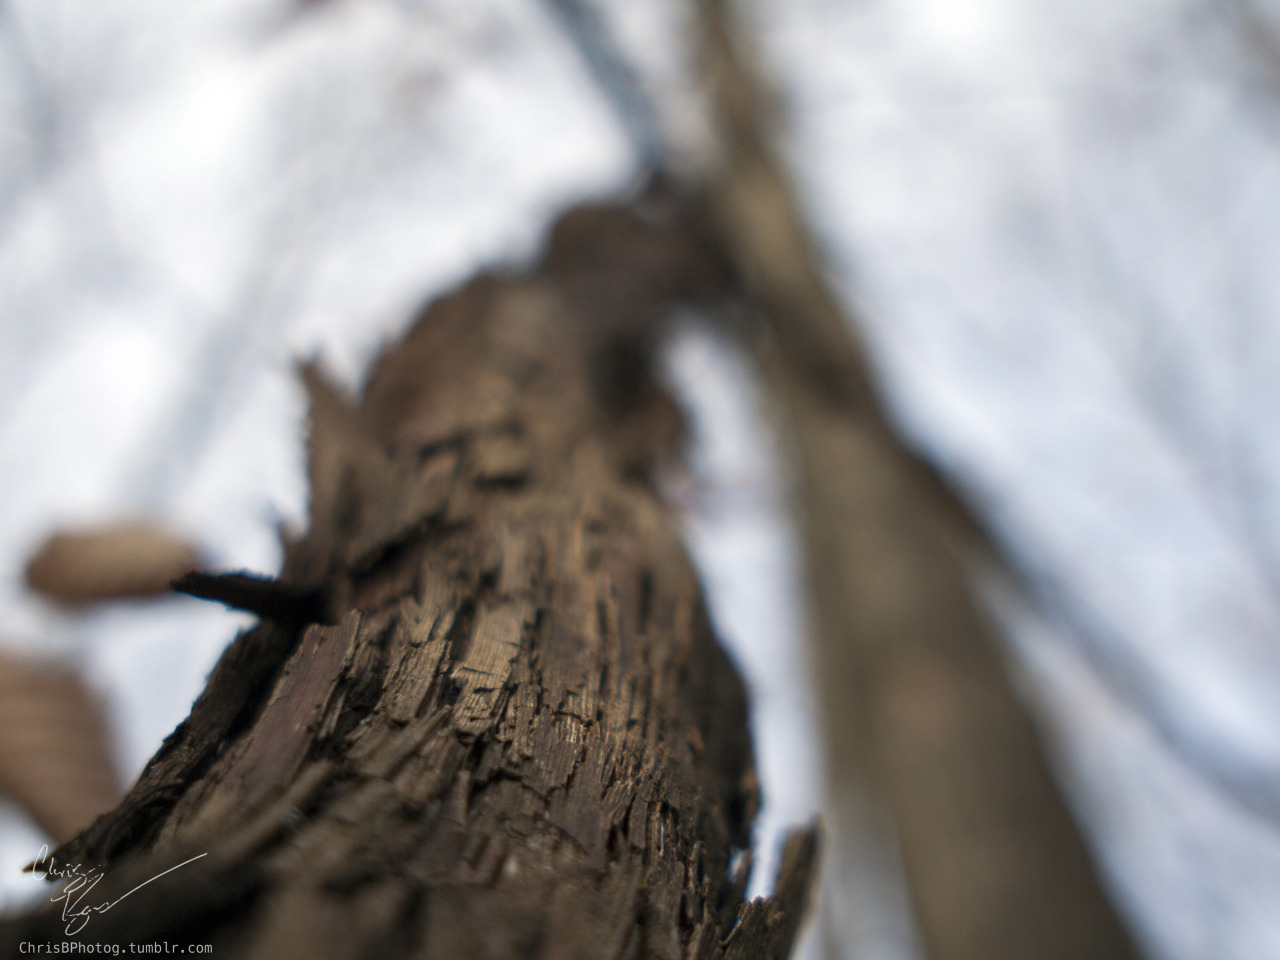 (if its not obvious I&rsquo;m a fan of narrow depth of field)